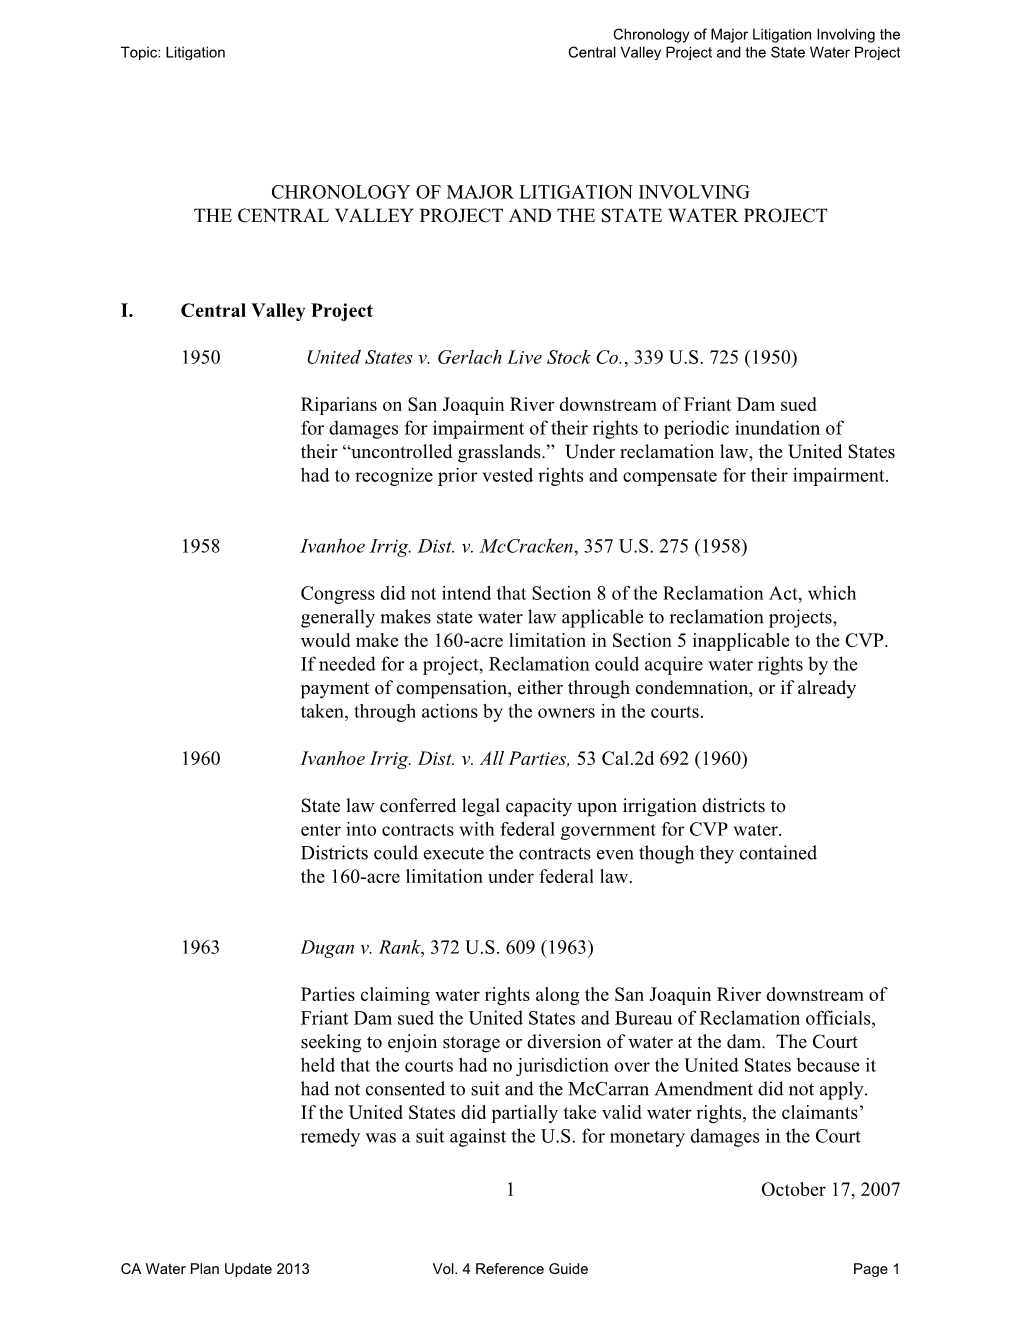 Chronology of Major Litigation Involving the Central Valley Project and the State Water Project